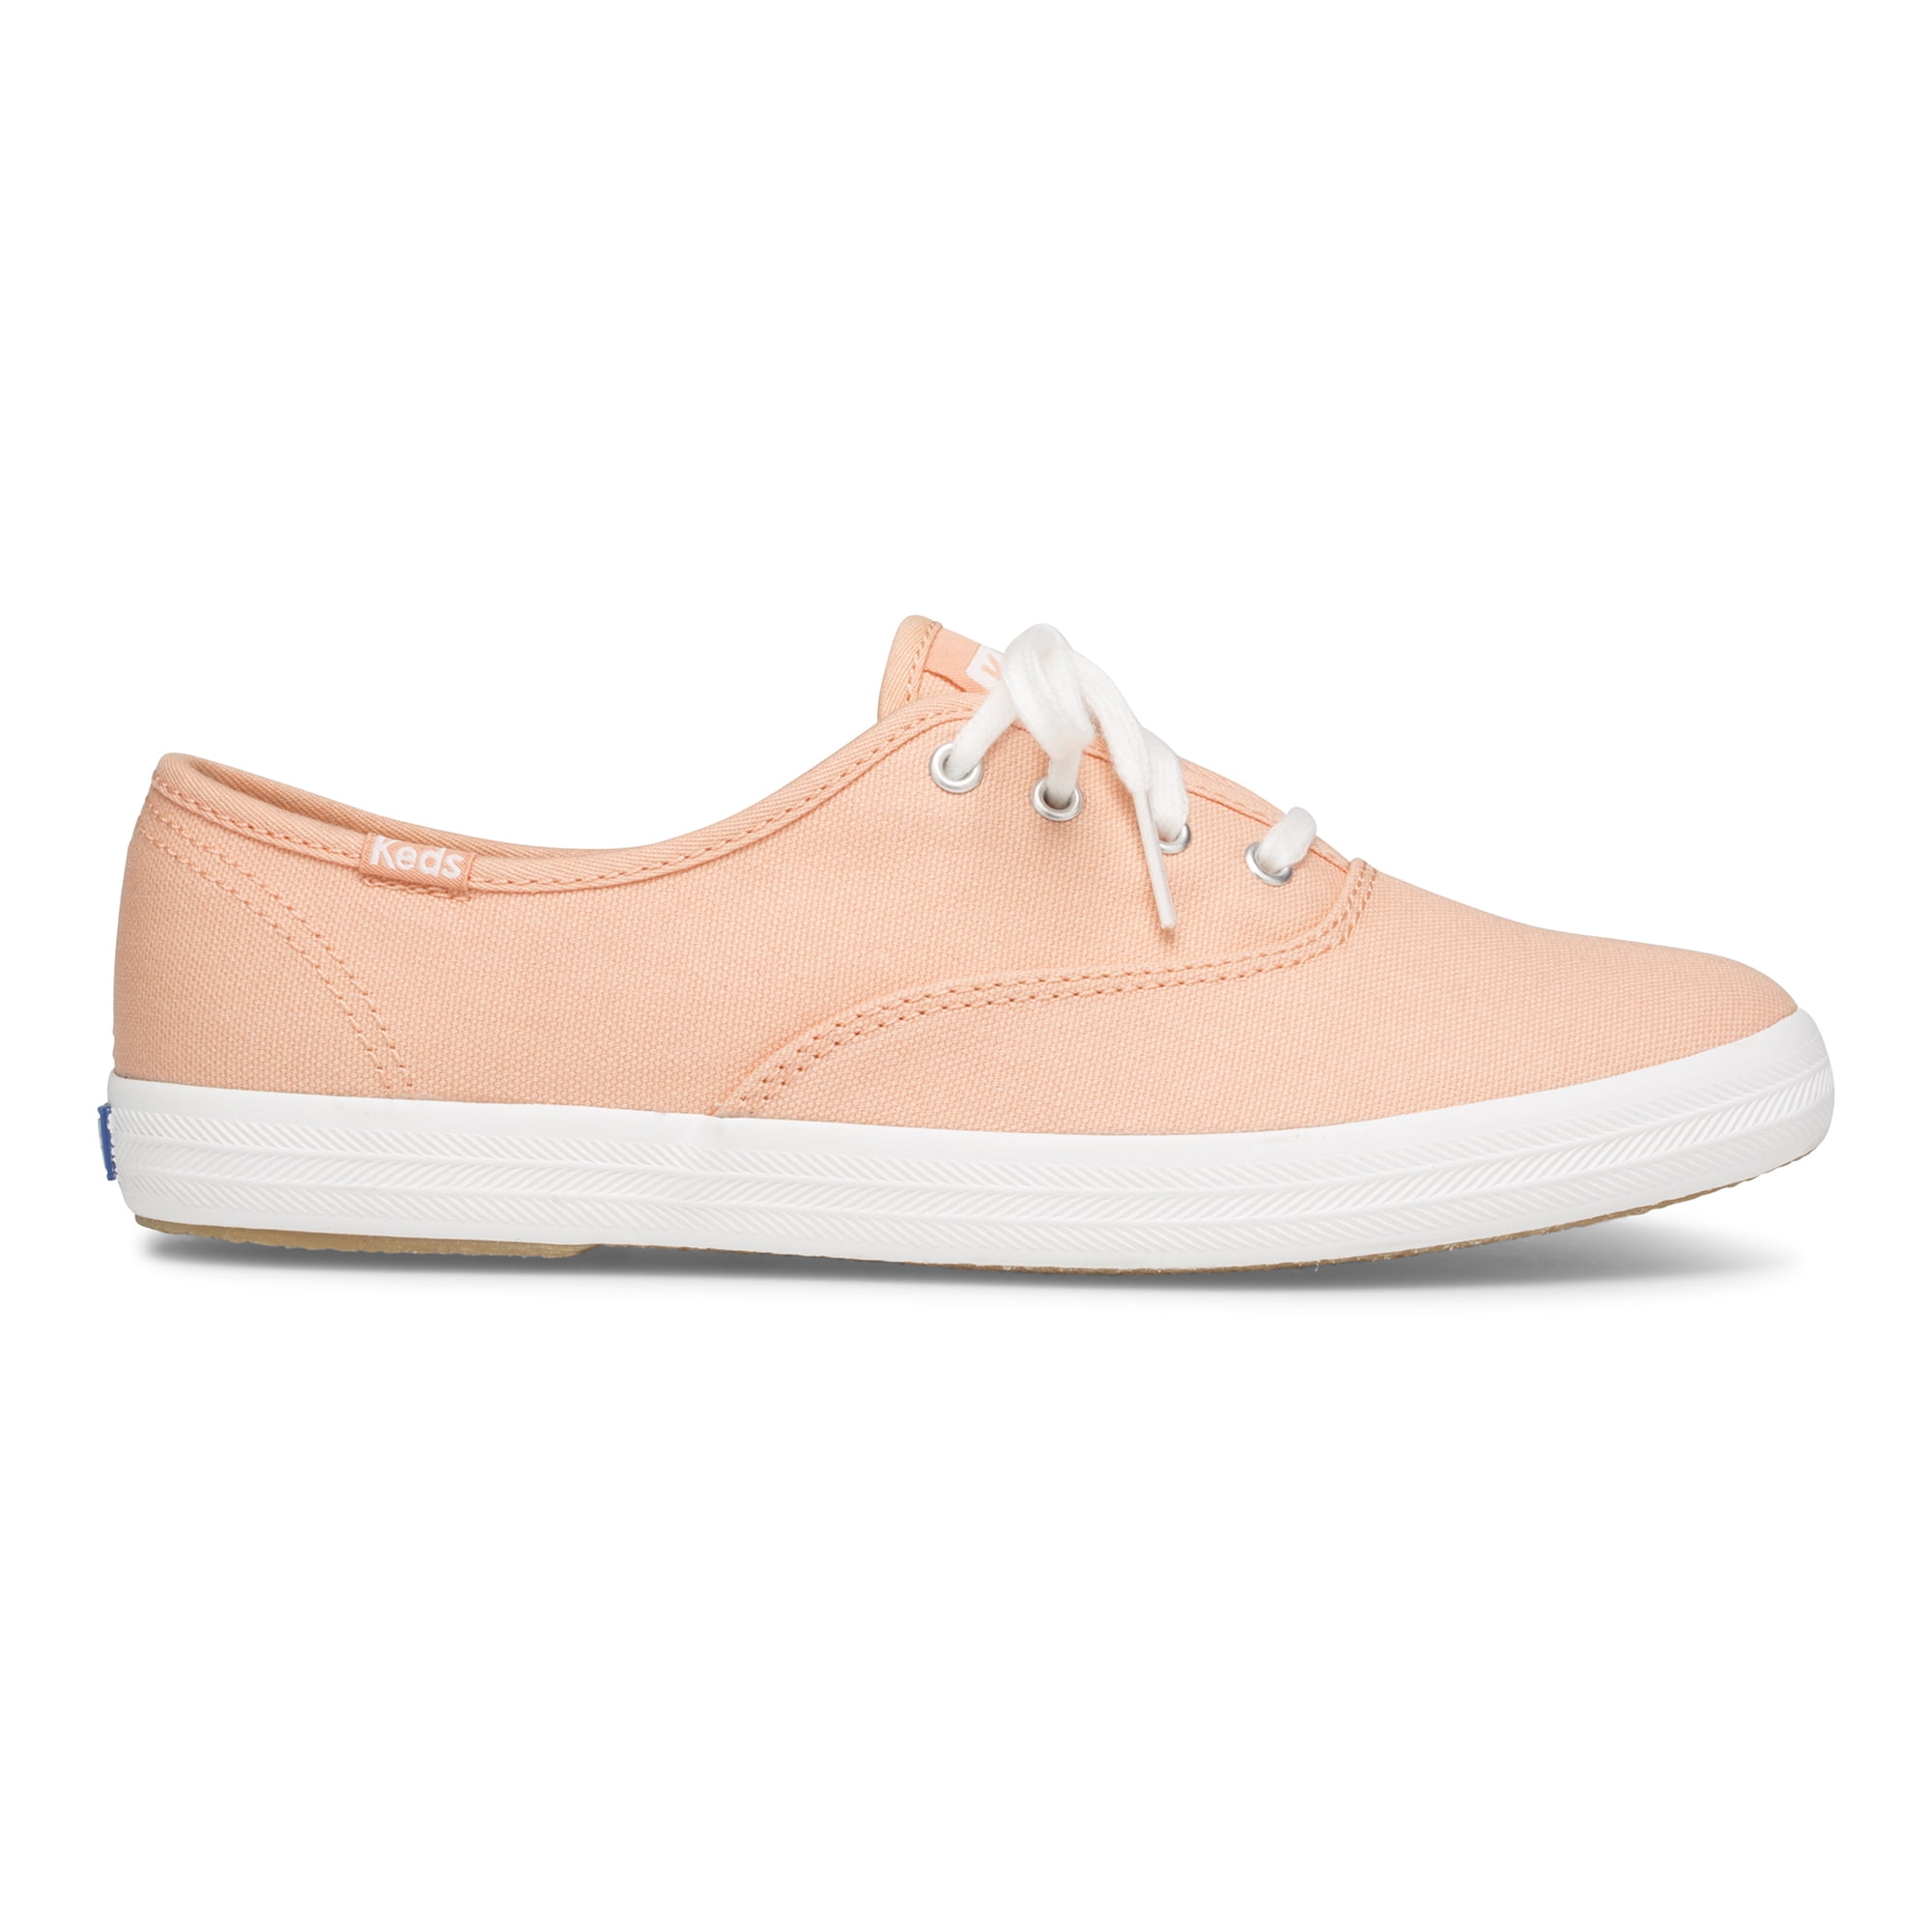 Keds Women's Champion Solids Sneakers in Coral, 9.5 US | Walmart Canada